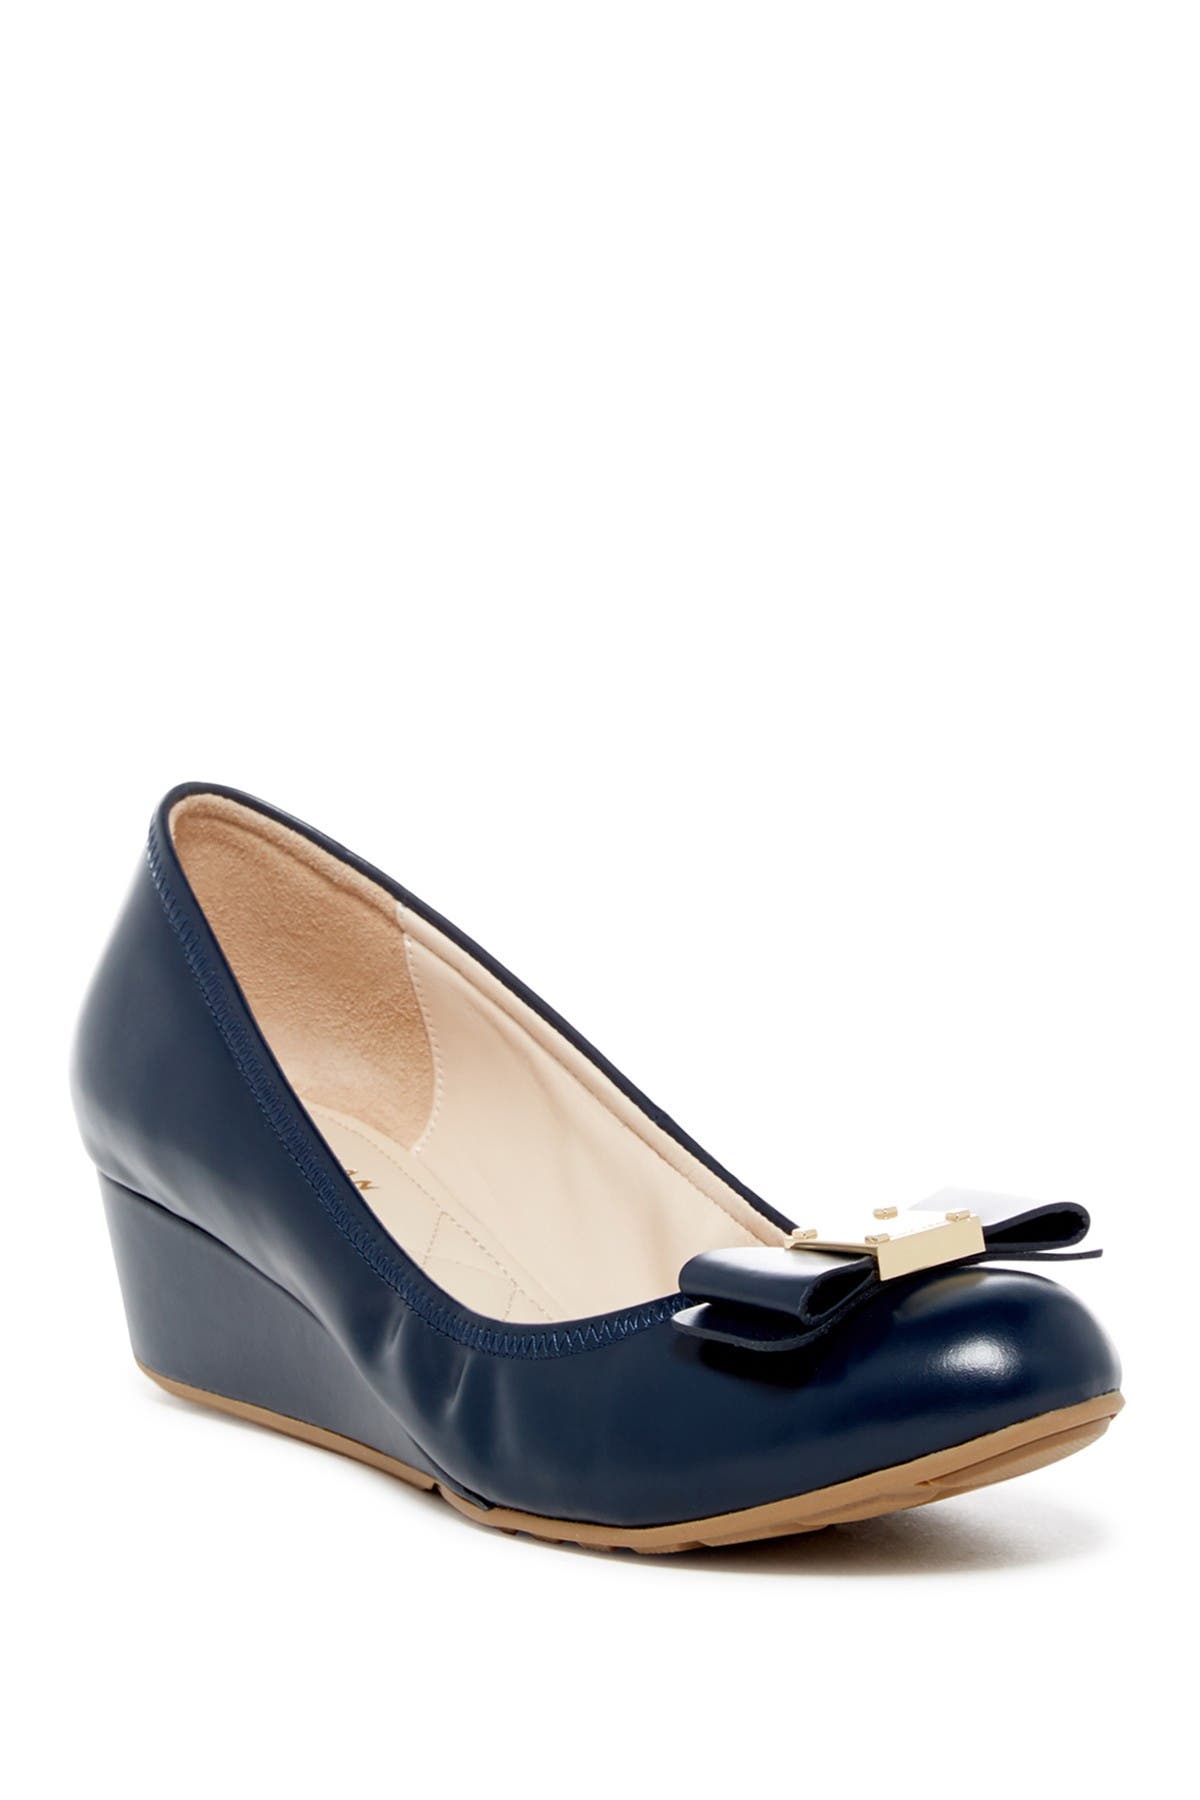 cole haan tali grand bow